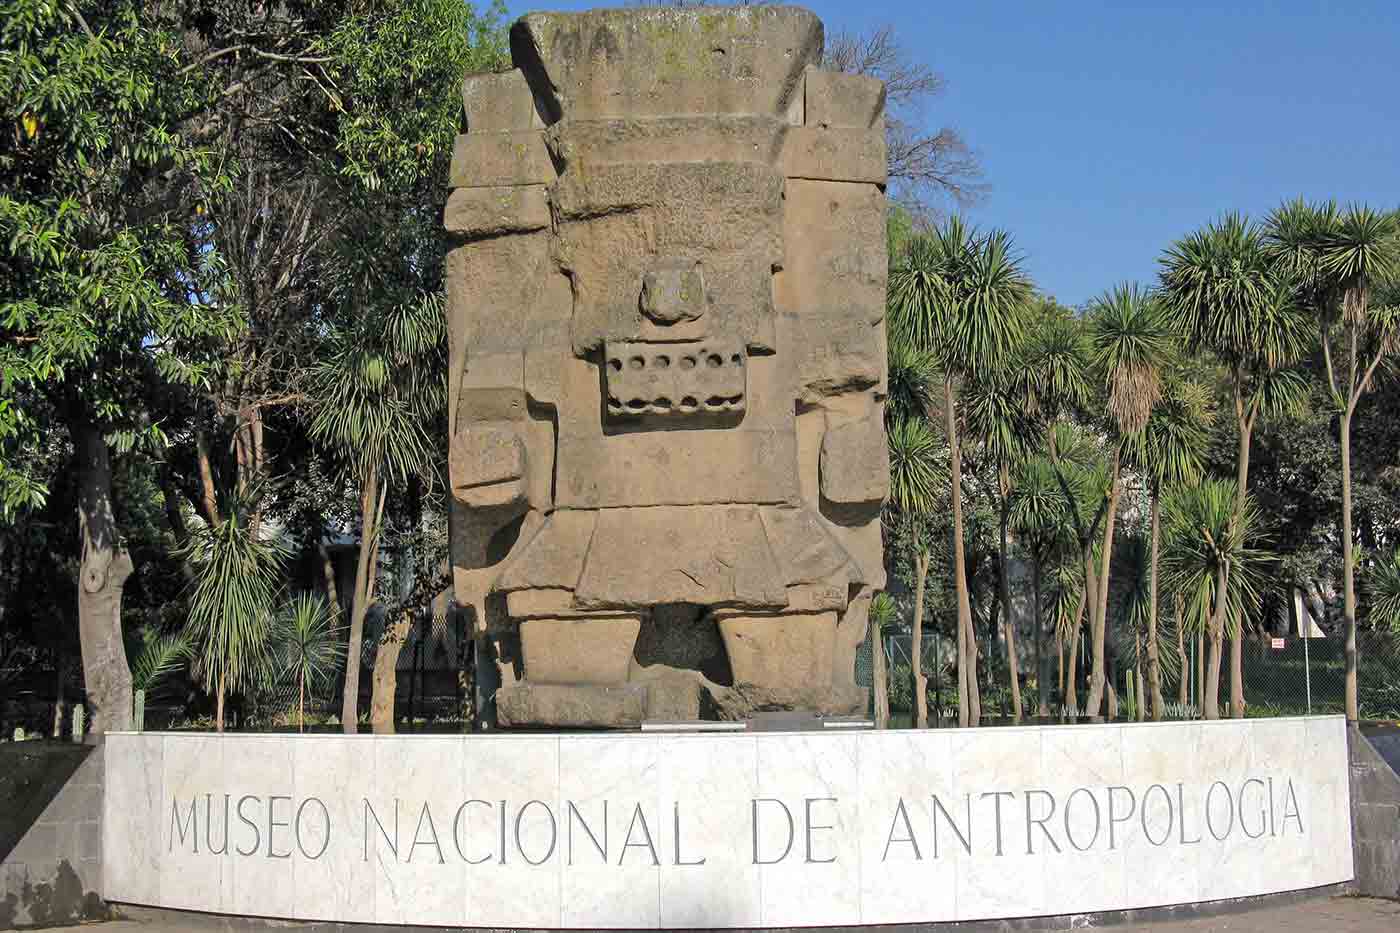 National Anthropology Museum